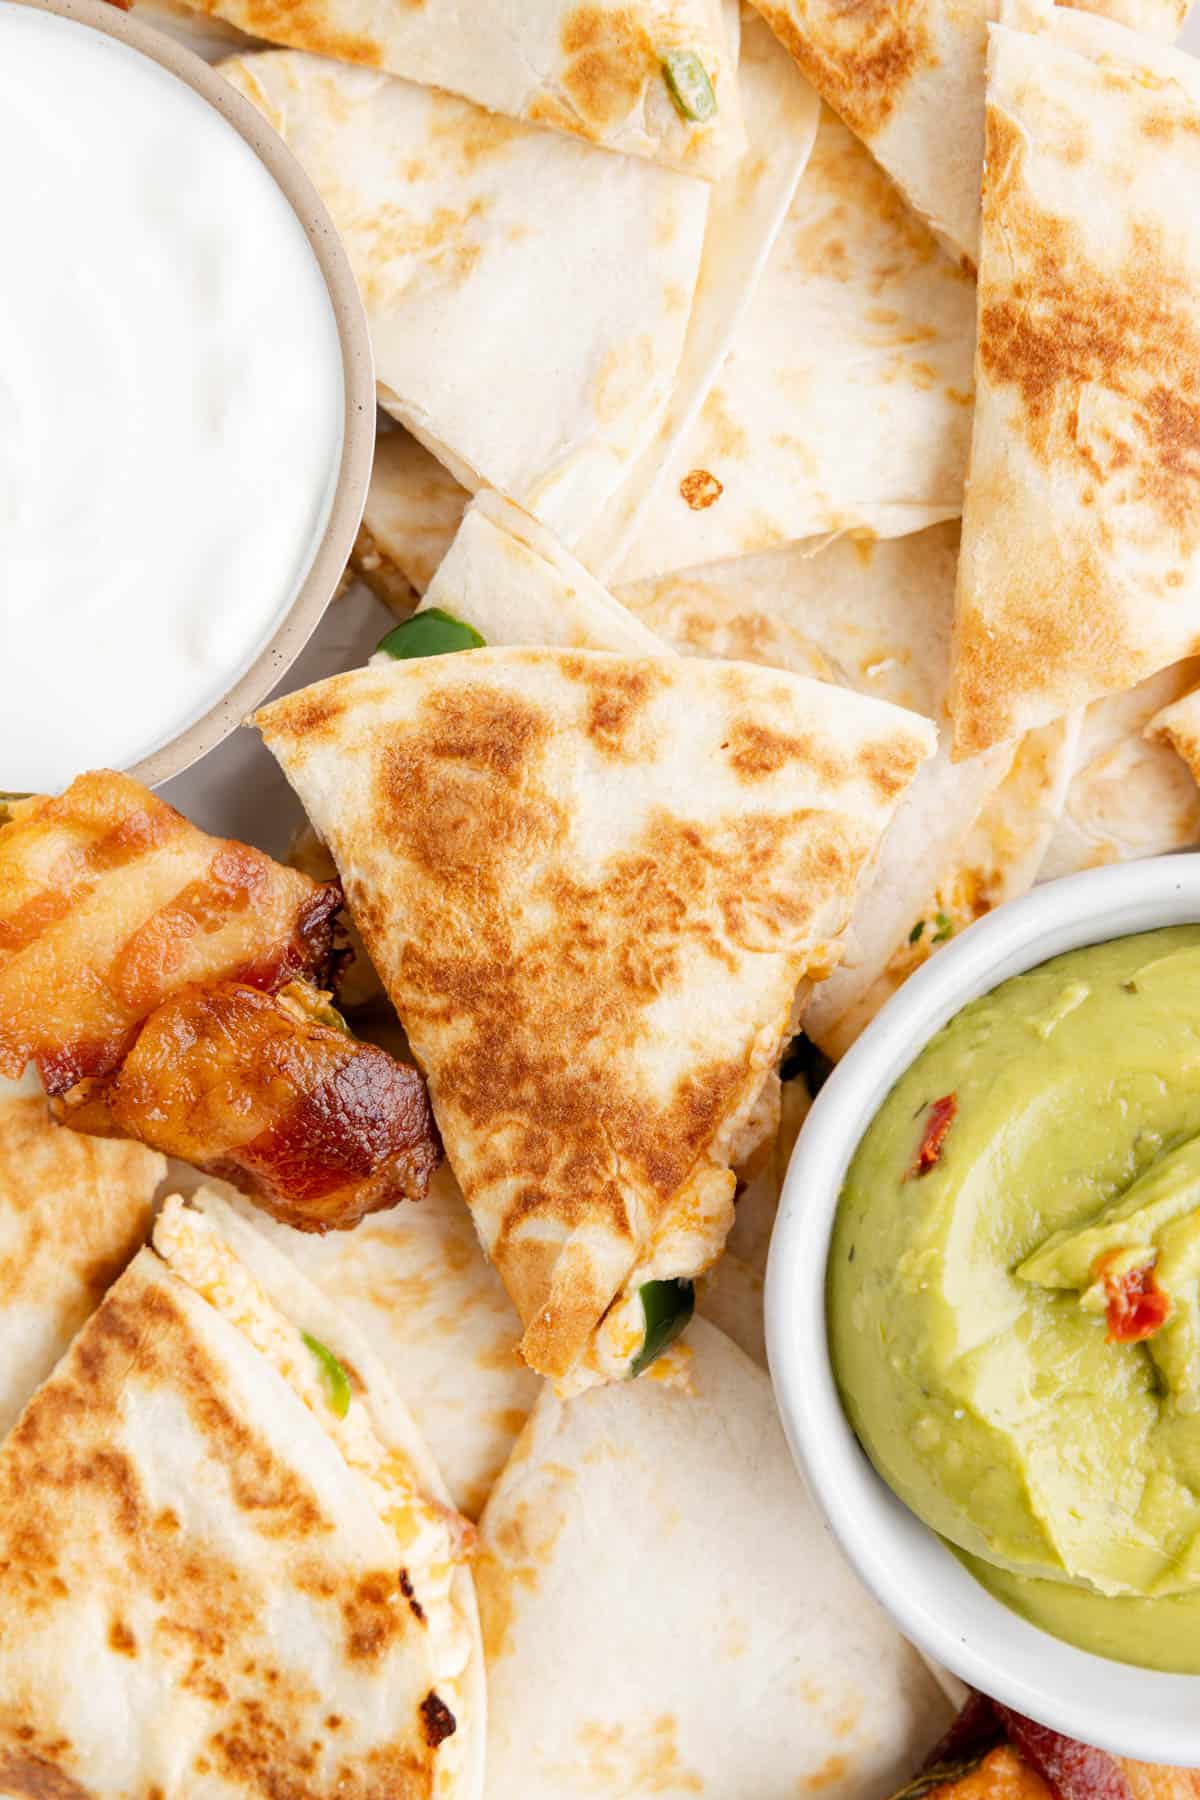 A close image of a triangle of jalapeno popper quesadilla on top of more quesadillas next to bowls of sour cream and guacamole.